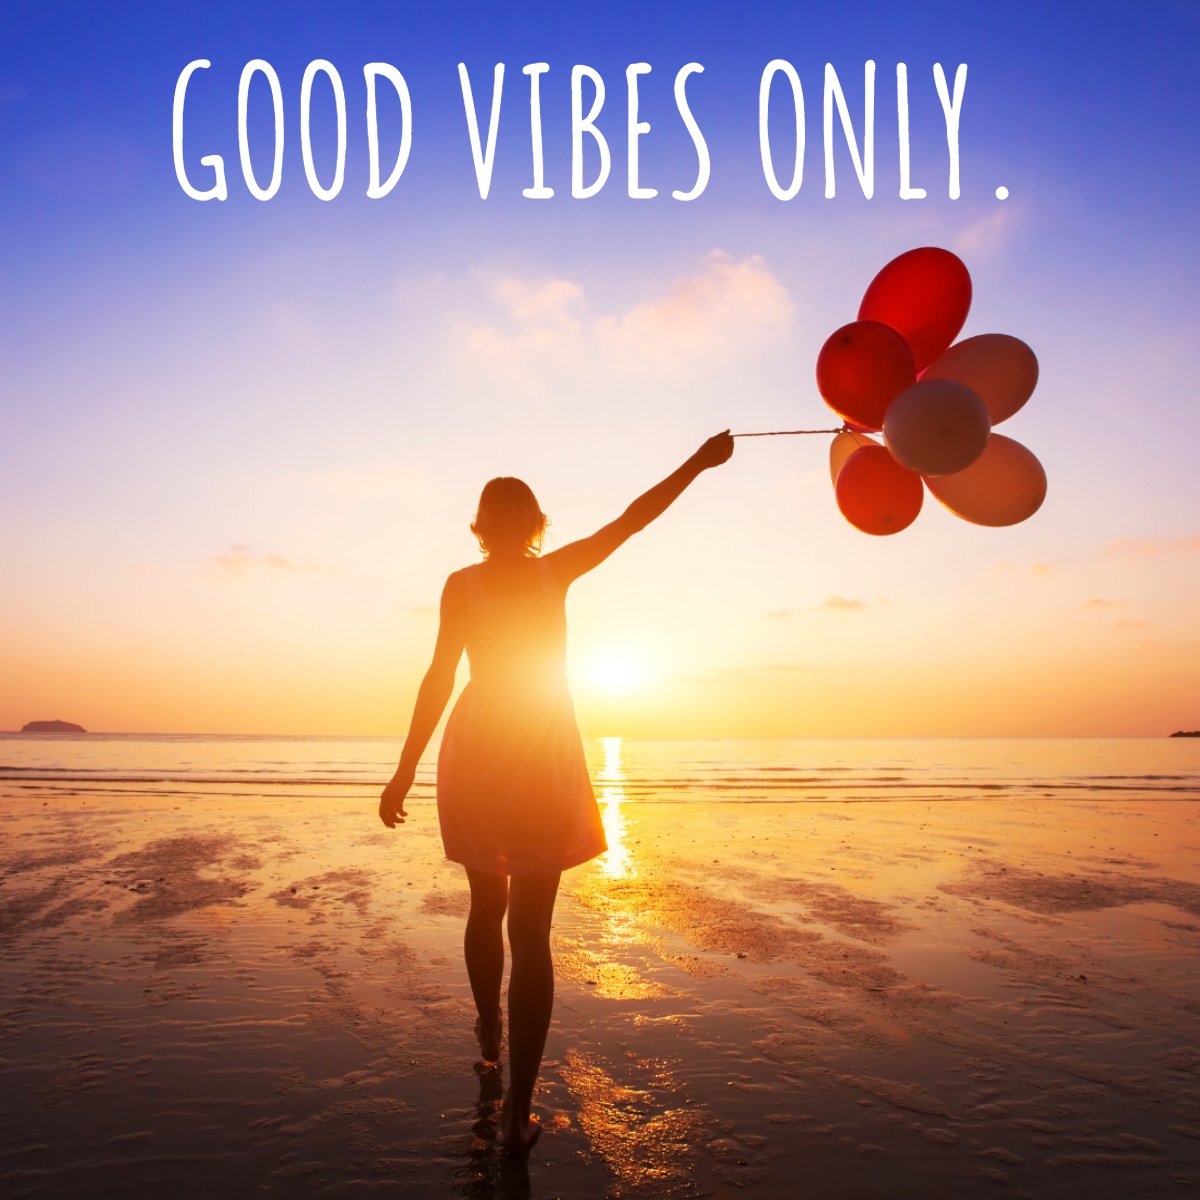 Good Vibes Only...🙆✌️

#goodvibesonly✌️    #vibes    #goodvibes    #positivevibes    #goodquote    #goodenergyonly    #instagood
#miamirealtor #argentinosenusa #argentinosenmiami #argentinosviviendoenmiami #argentinosporelmundo #realestatemiami